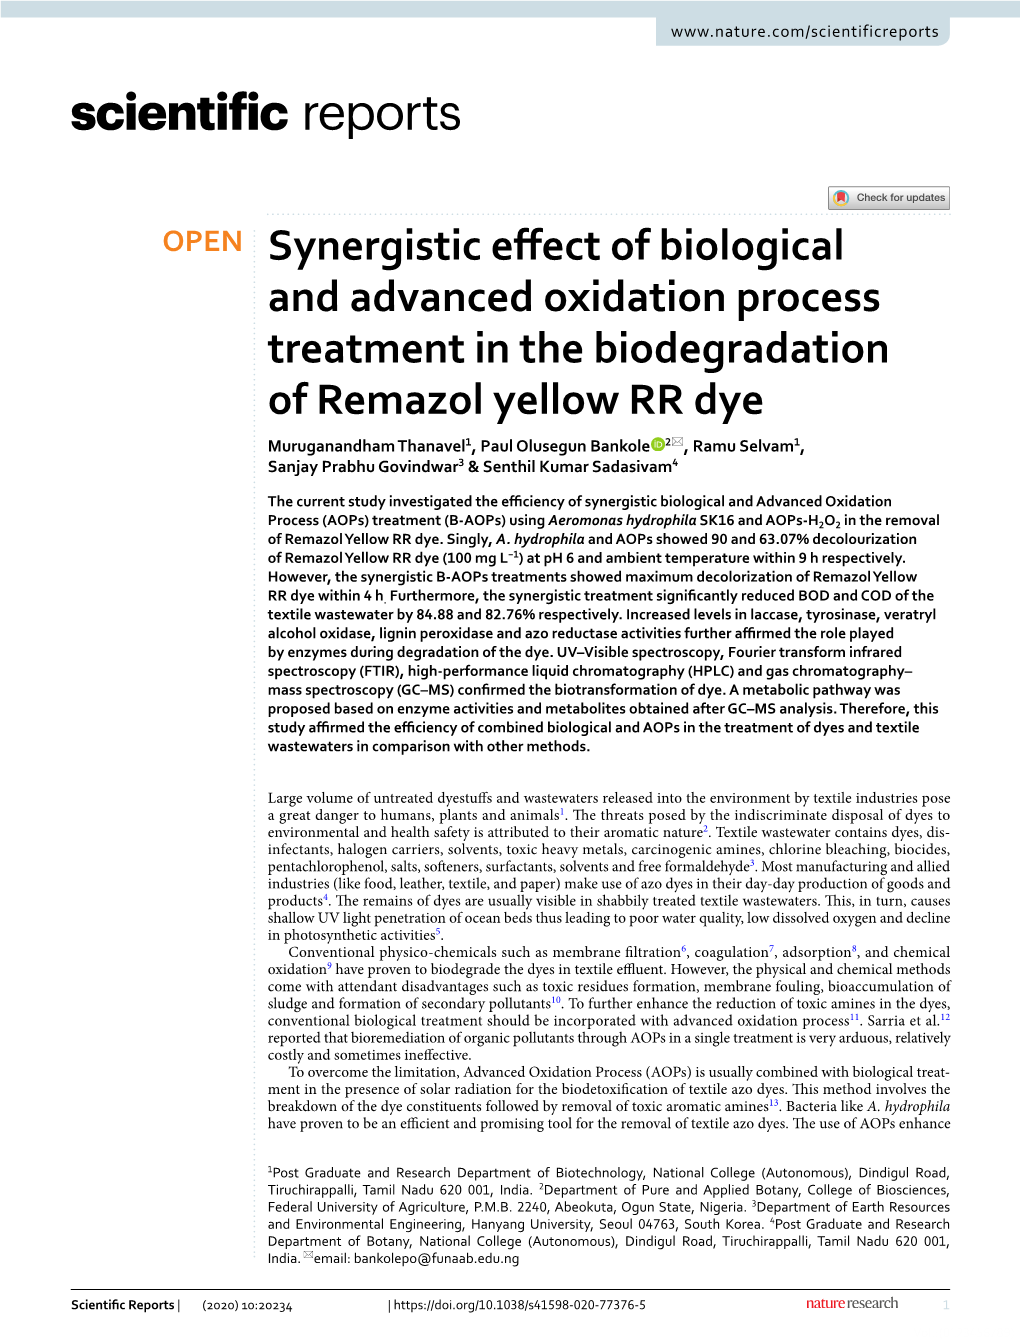 Synergistic Effect of Biological and Advanced Oxidation Process